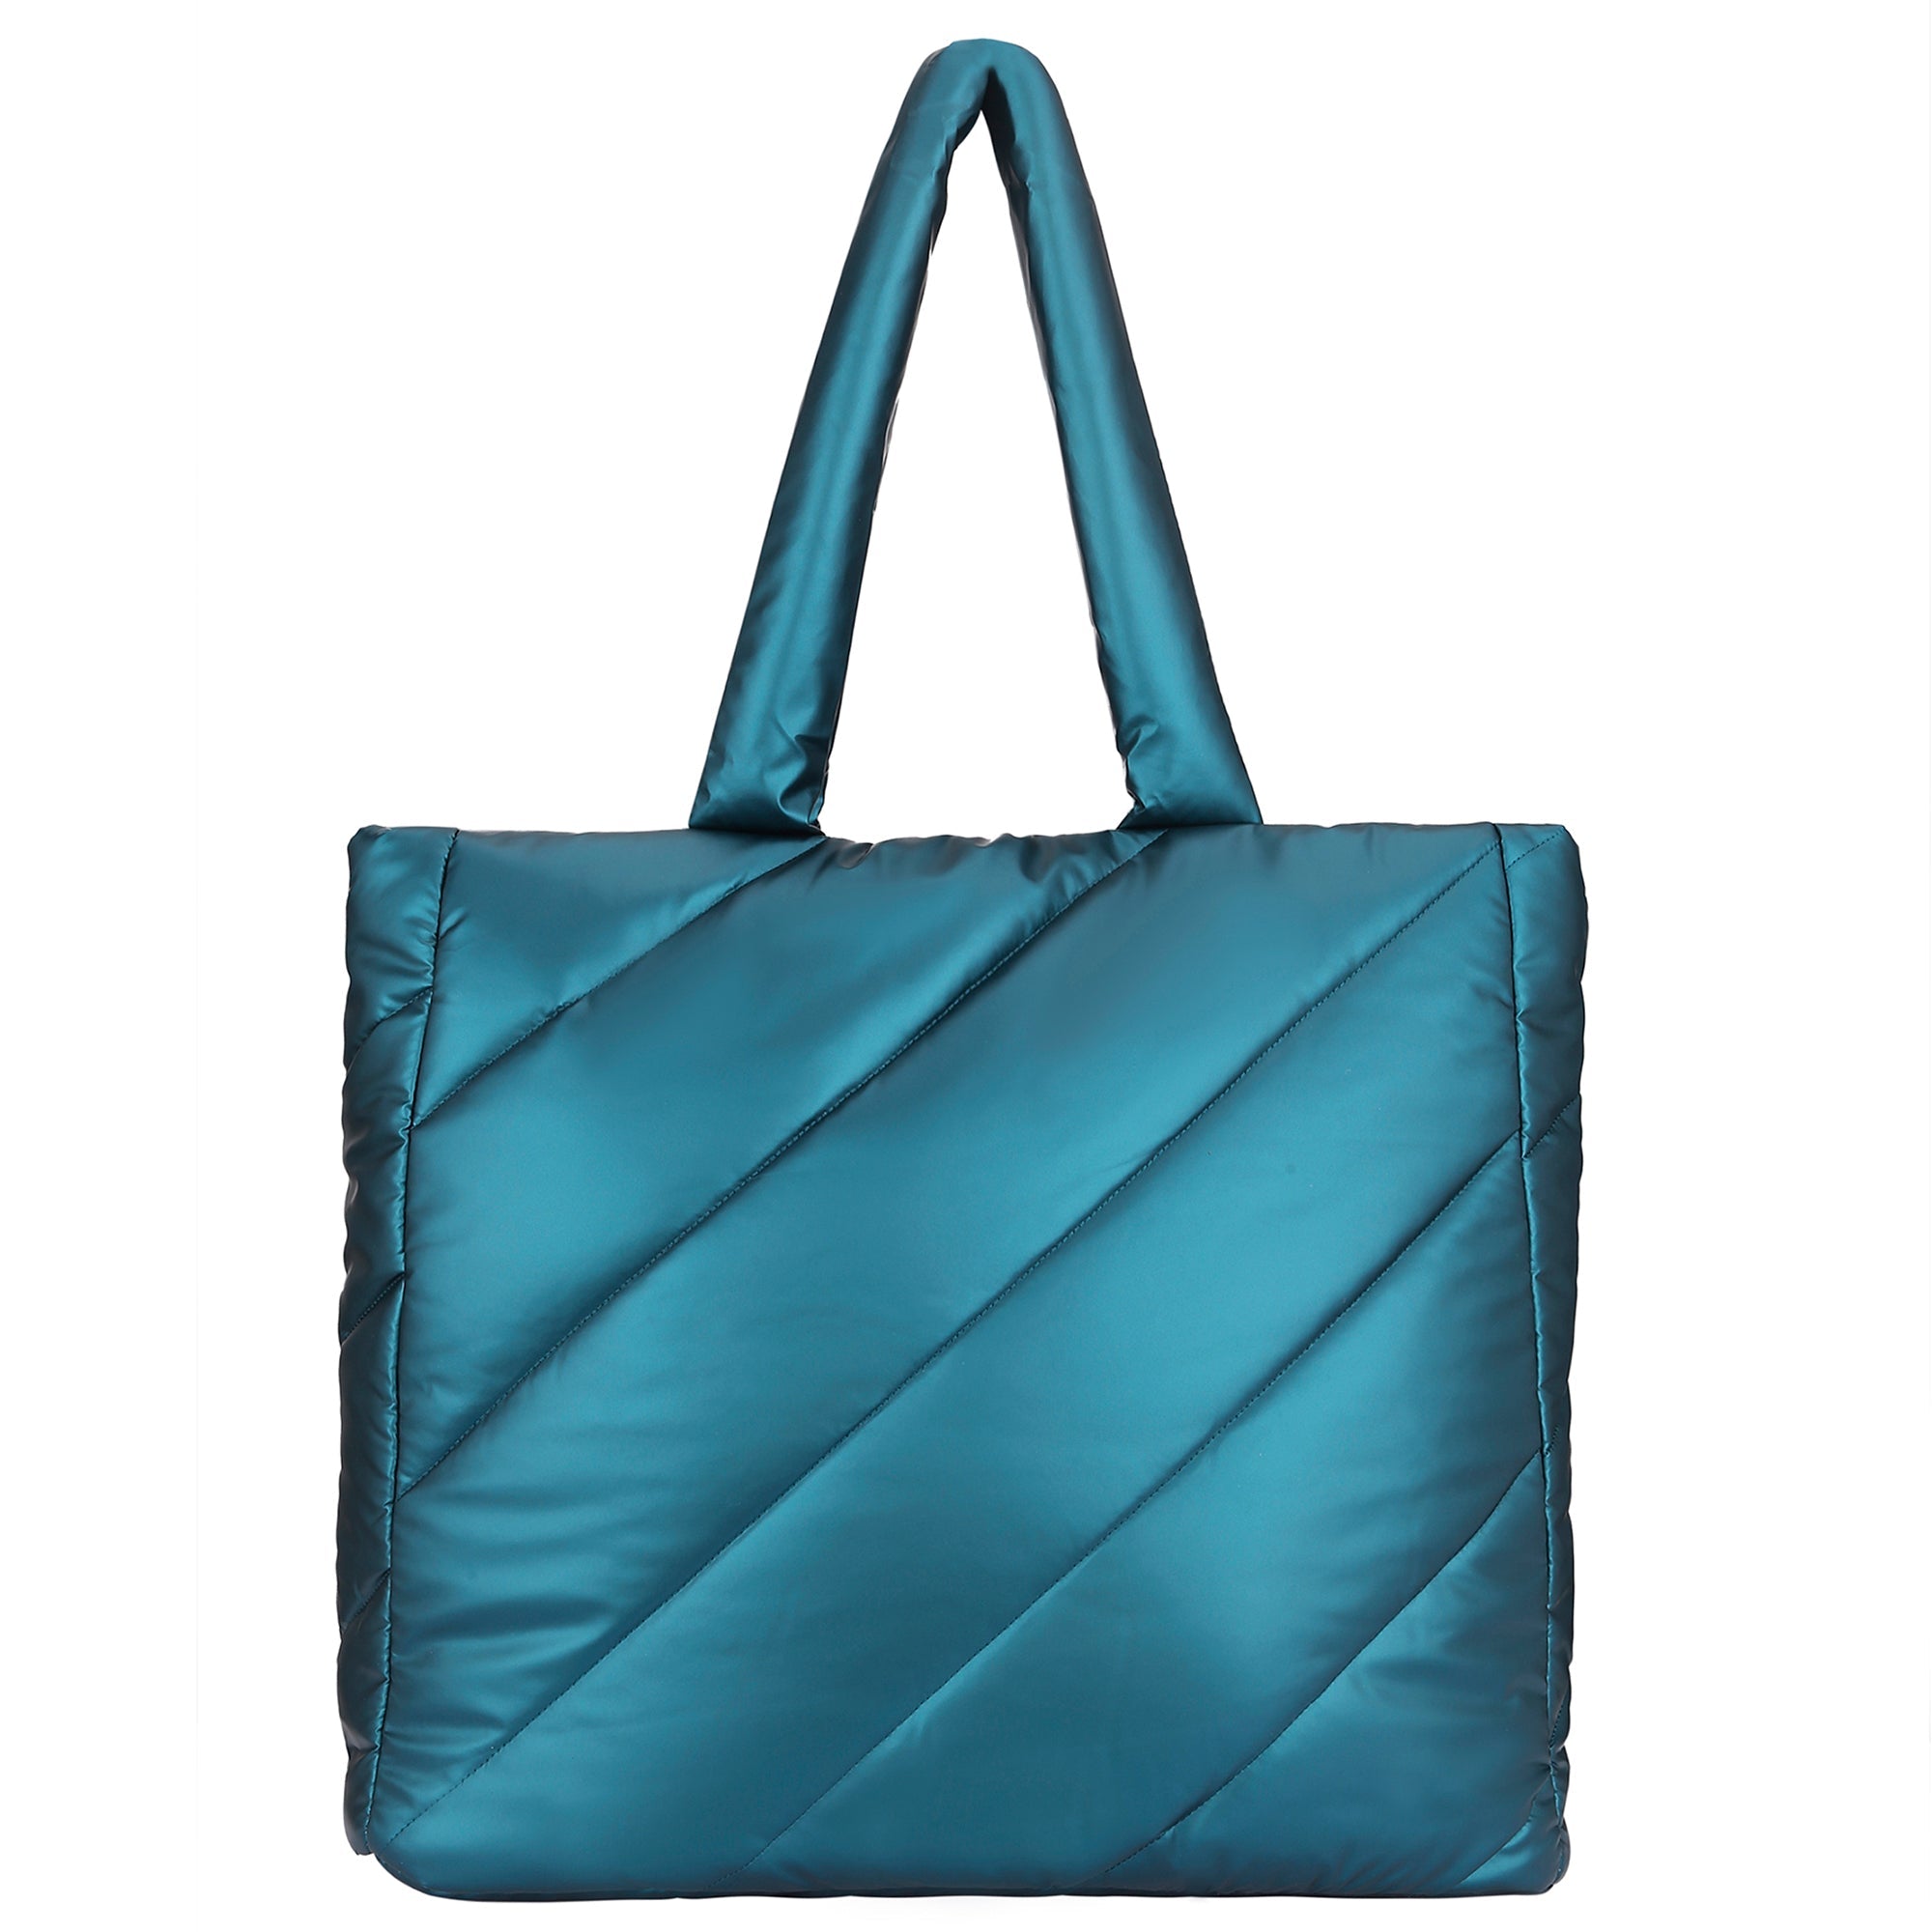 Accessorize London Women's Recycled Nylon Blue Quilted Shopper Bag